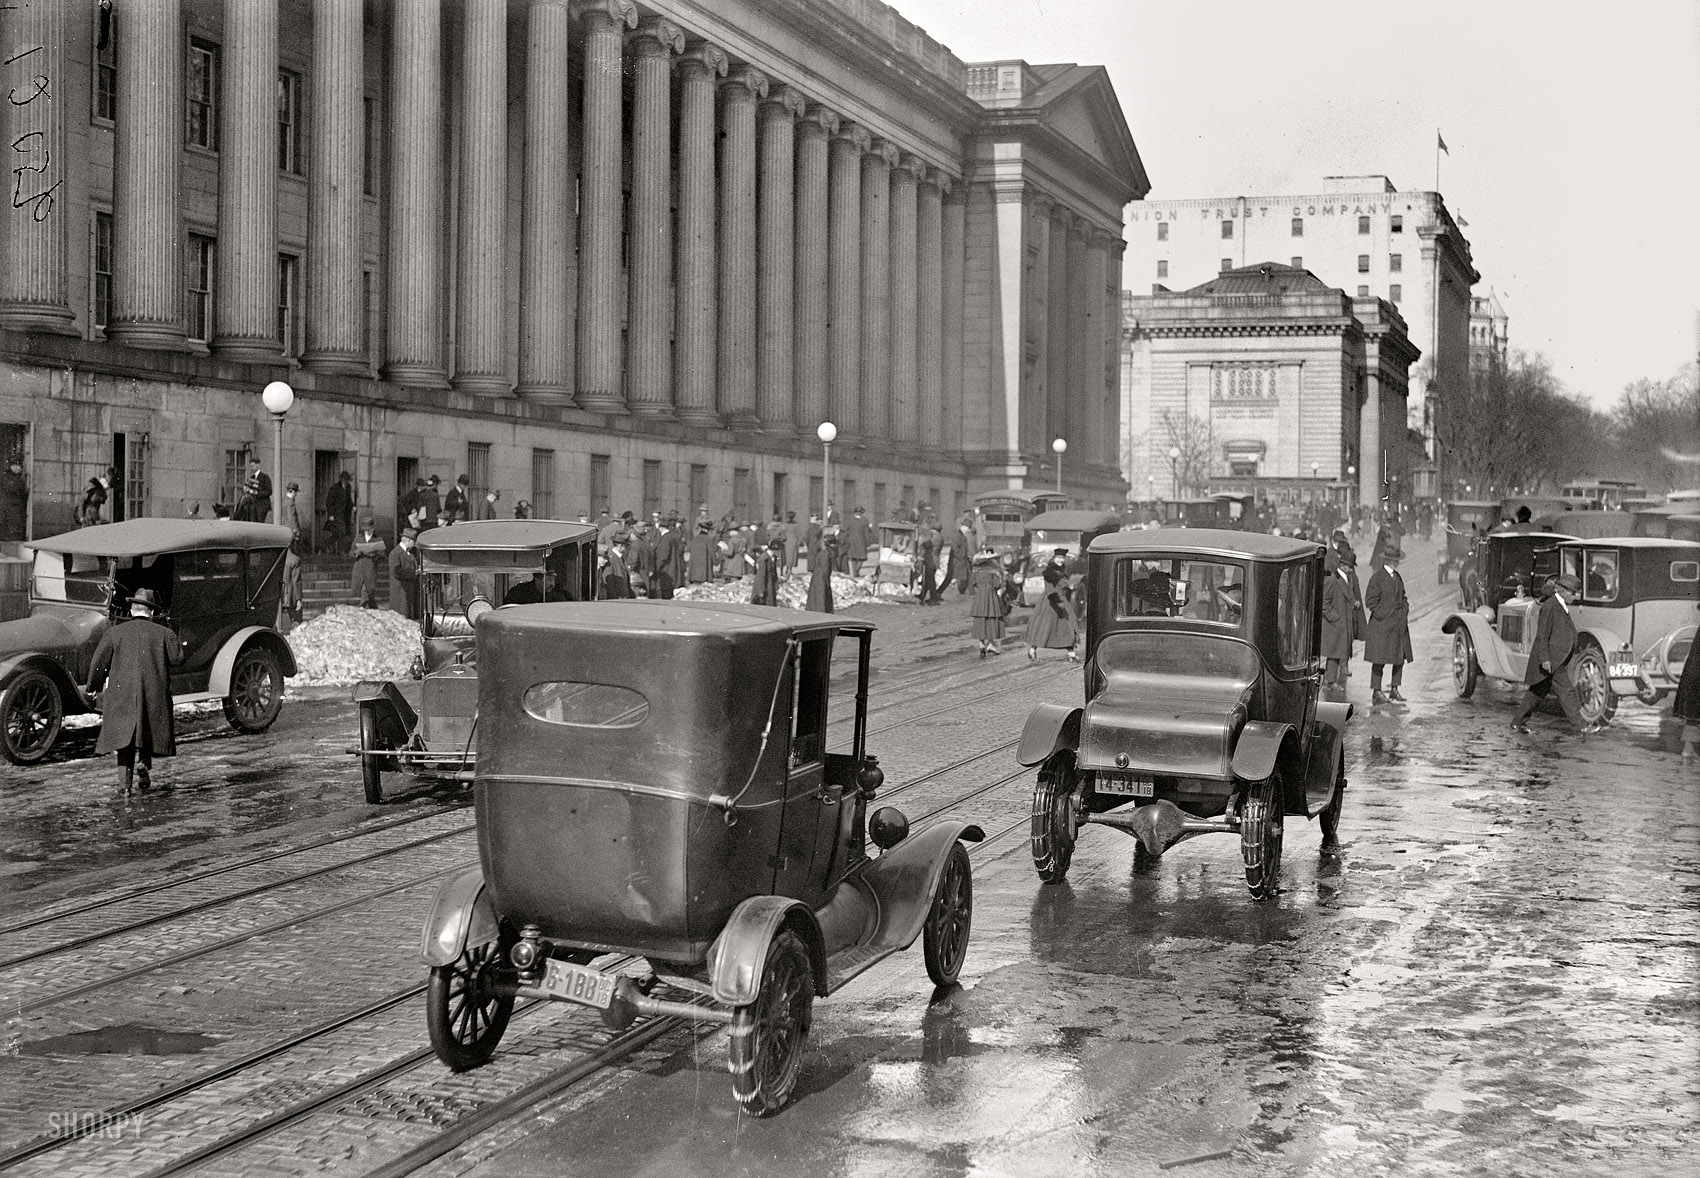 Washington, D.C., in 1918. "Fifteenth Street." Motoring past the Treasury Building with chains on. Harris & Ewing Collection glass negative. View full size.